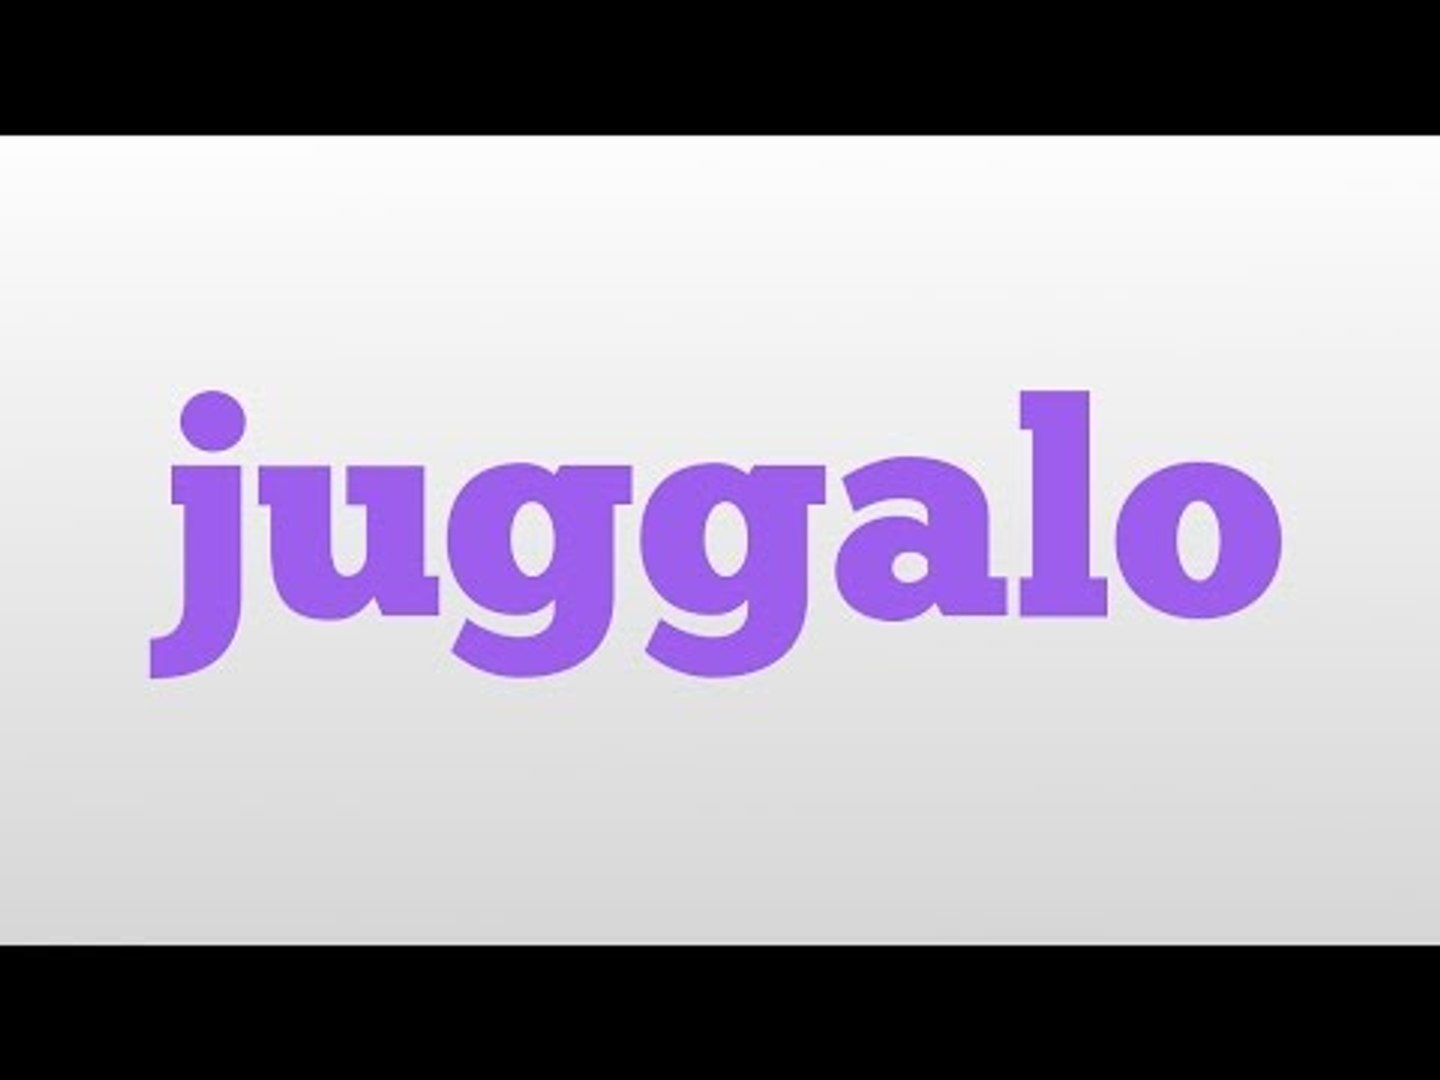 juggalo meaning and pronunciation